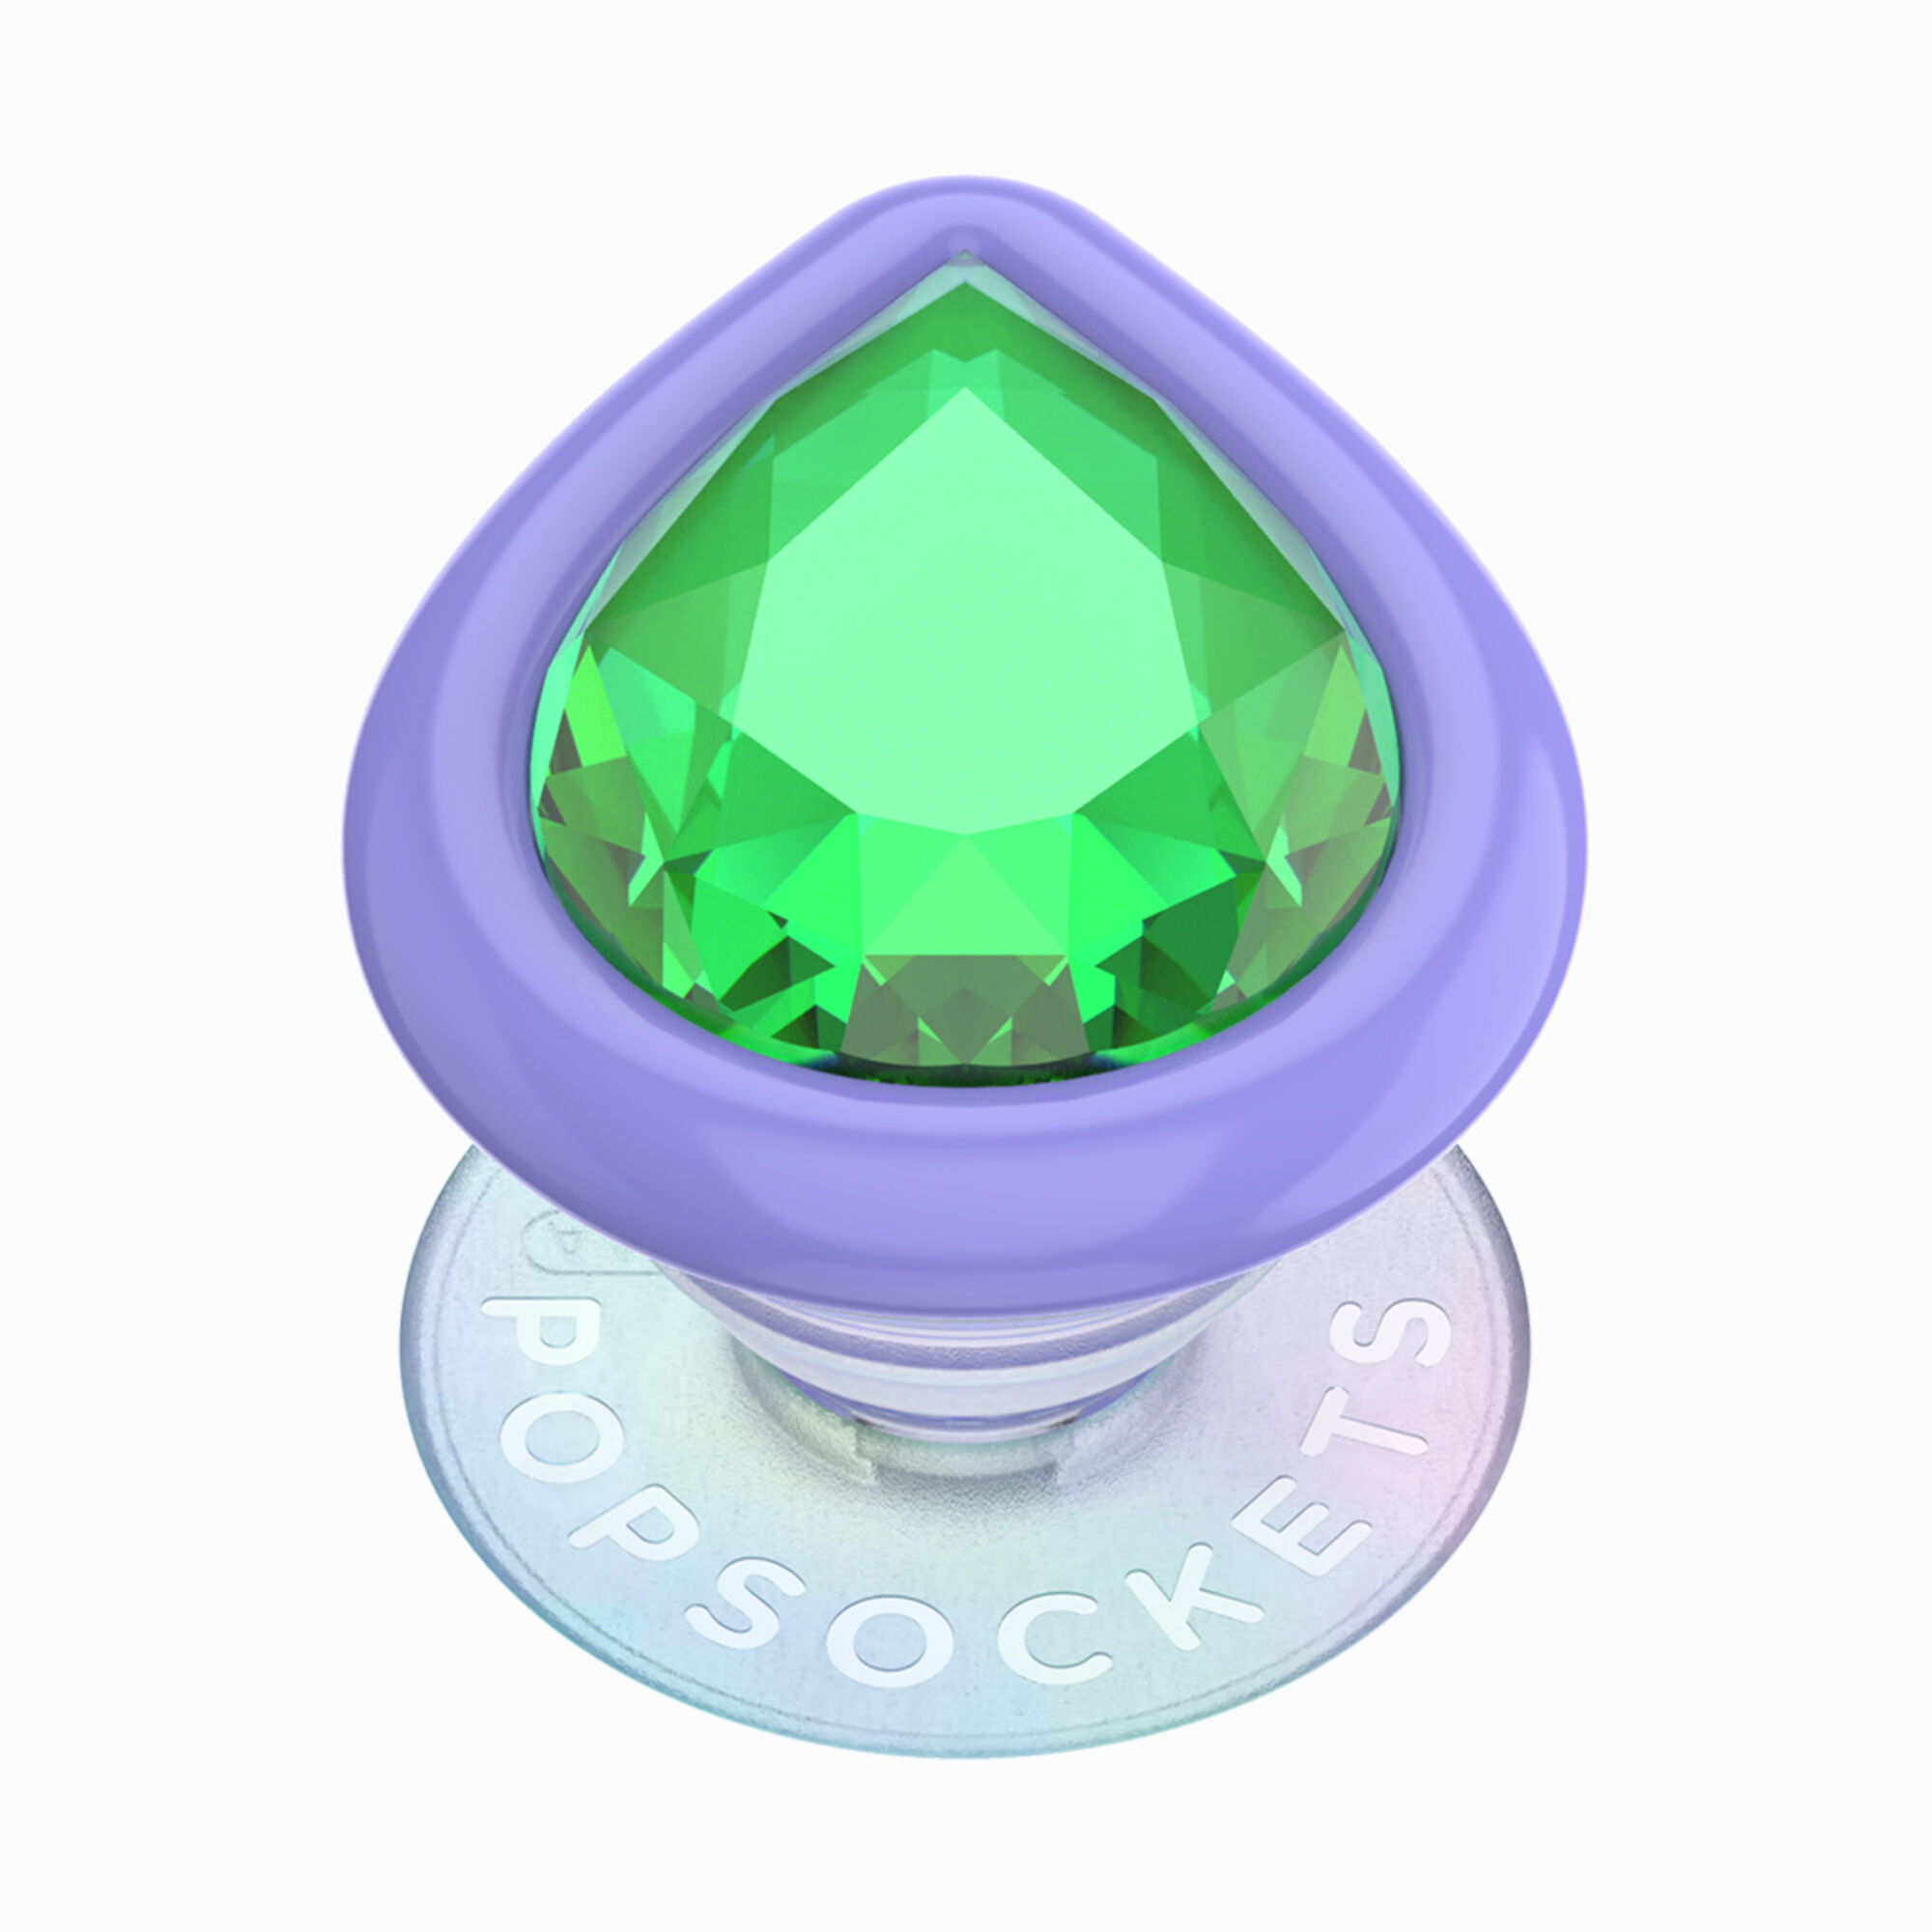 View Claires Popsockets Popgrip Crystal Teardrop information